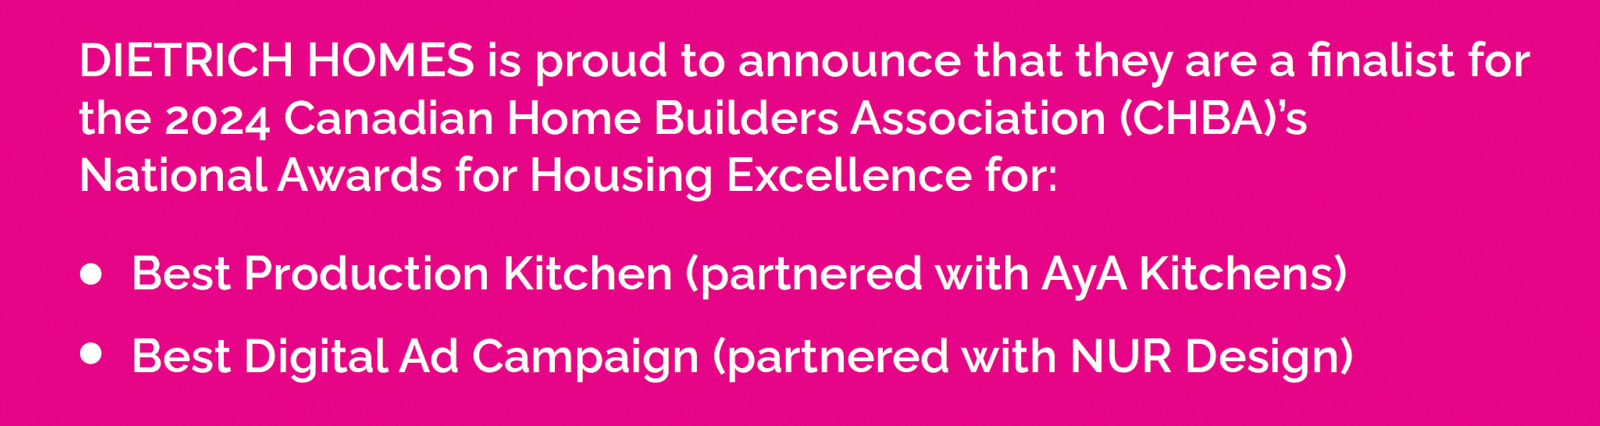 DIETRICH HOMES is a finalist for the 2024 Canadian Home Builders Association’s National Awards for Housing Excellence